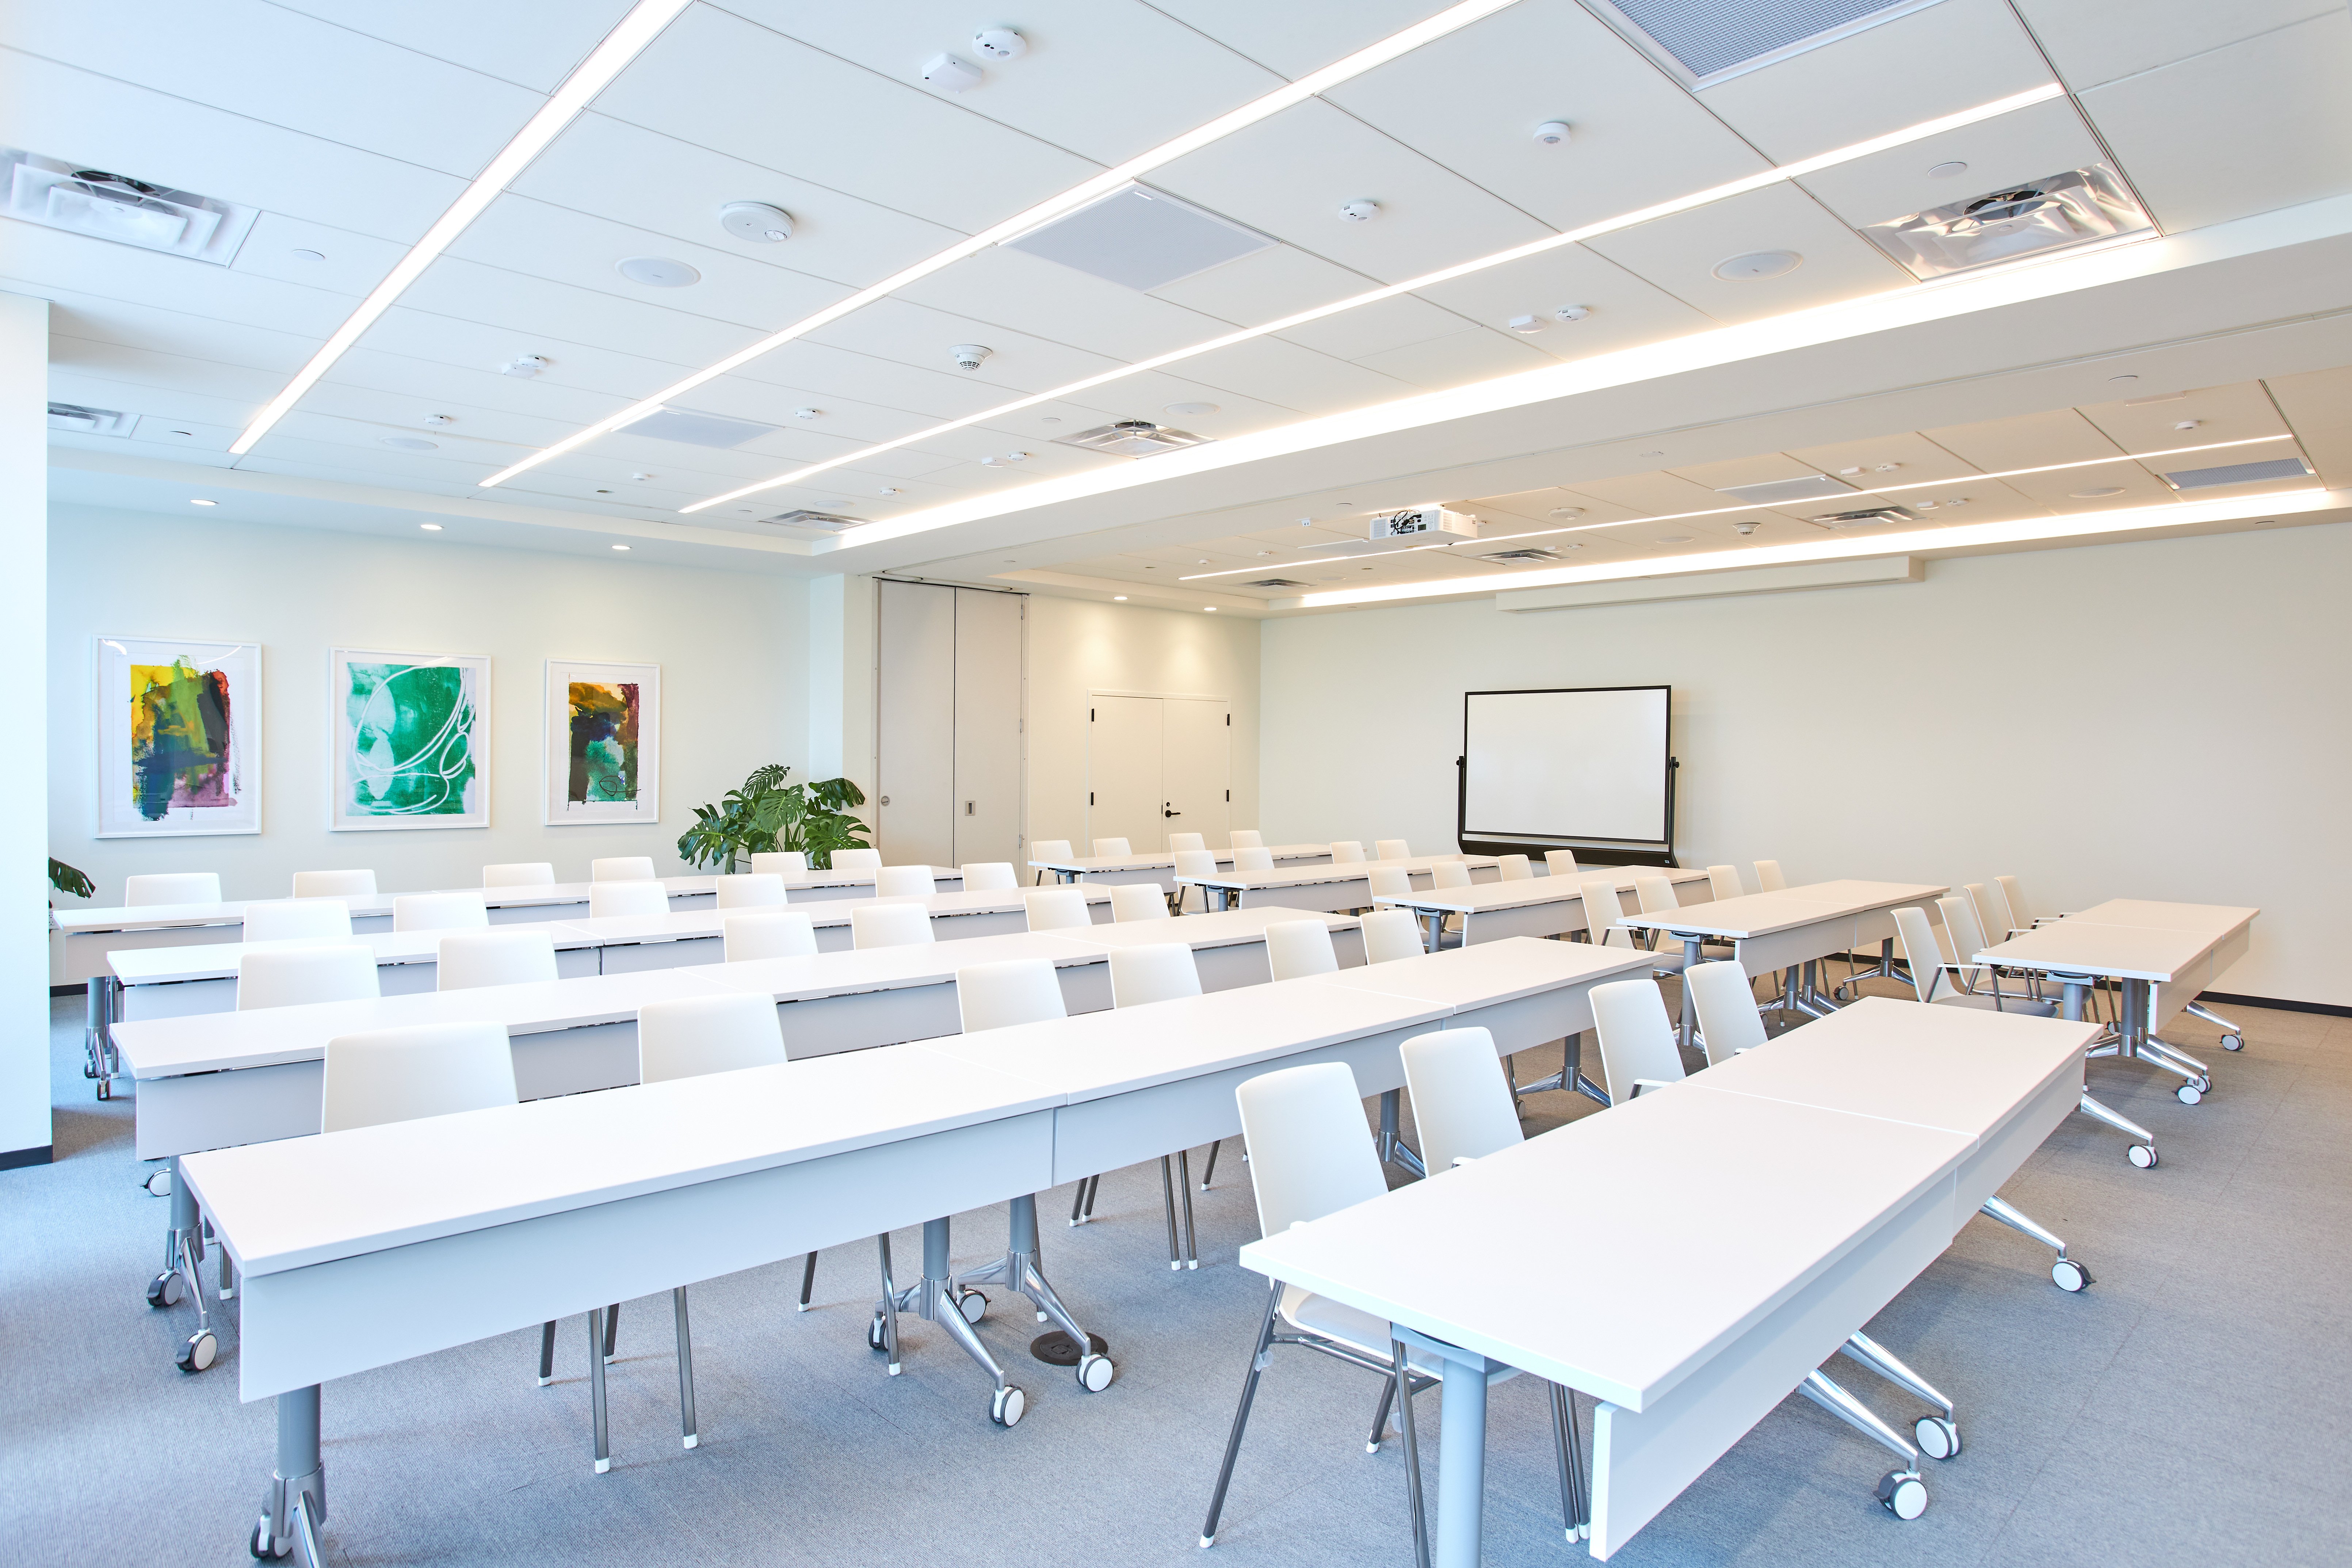 6 Must-Have Types of Corporate Office Amenities for 2022